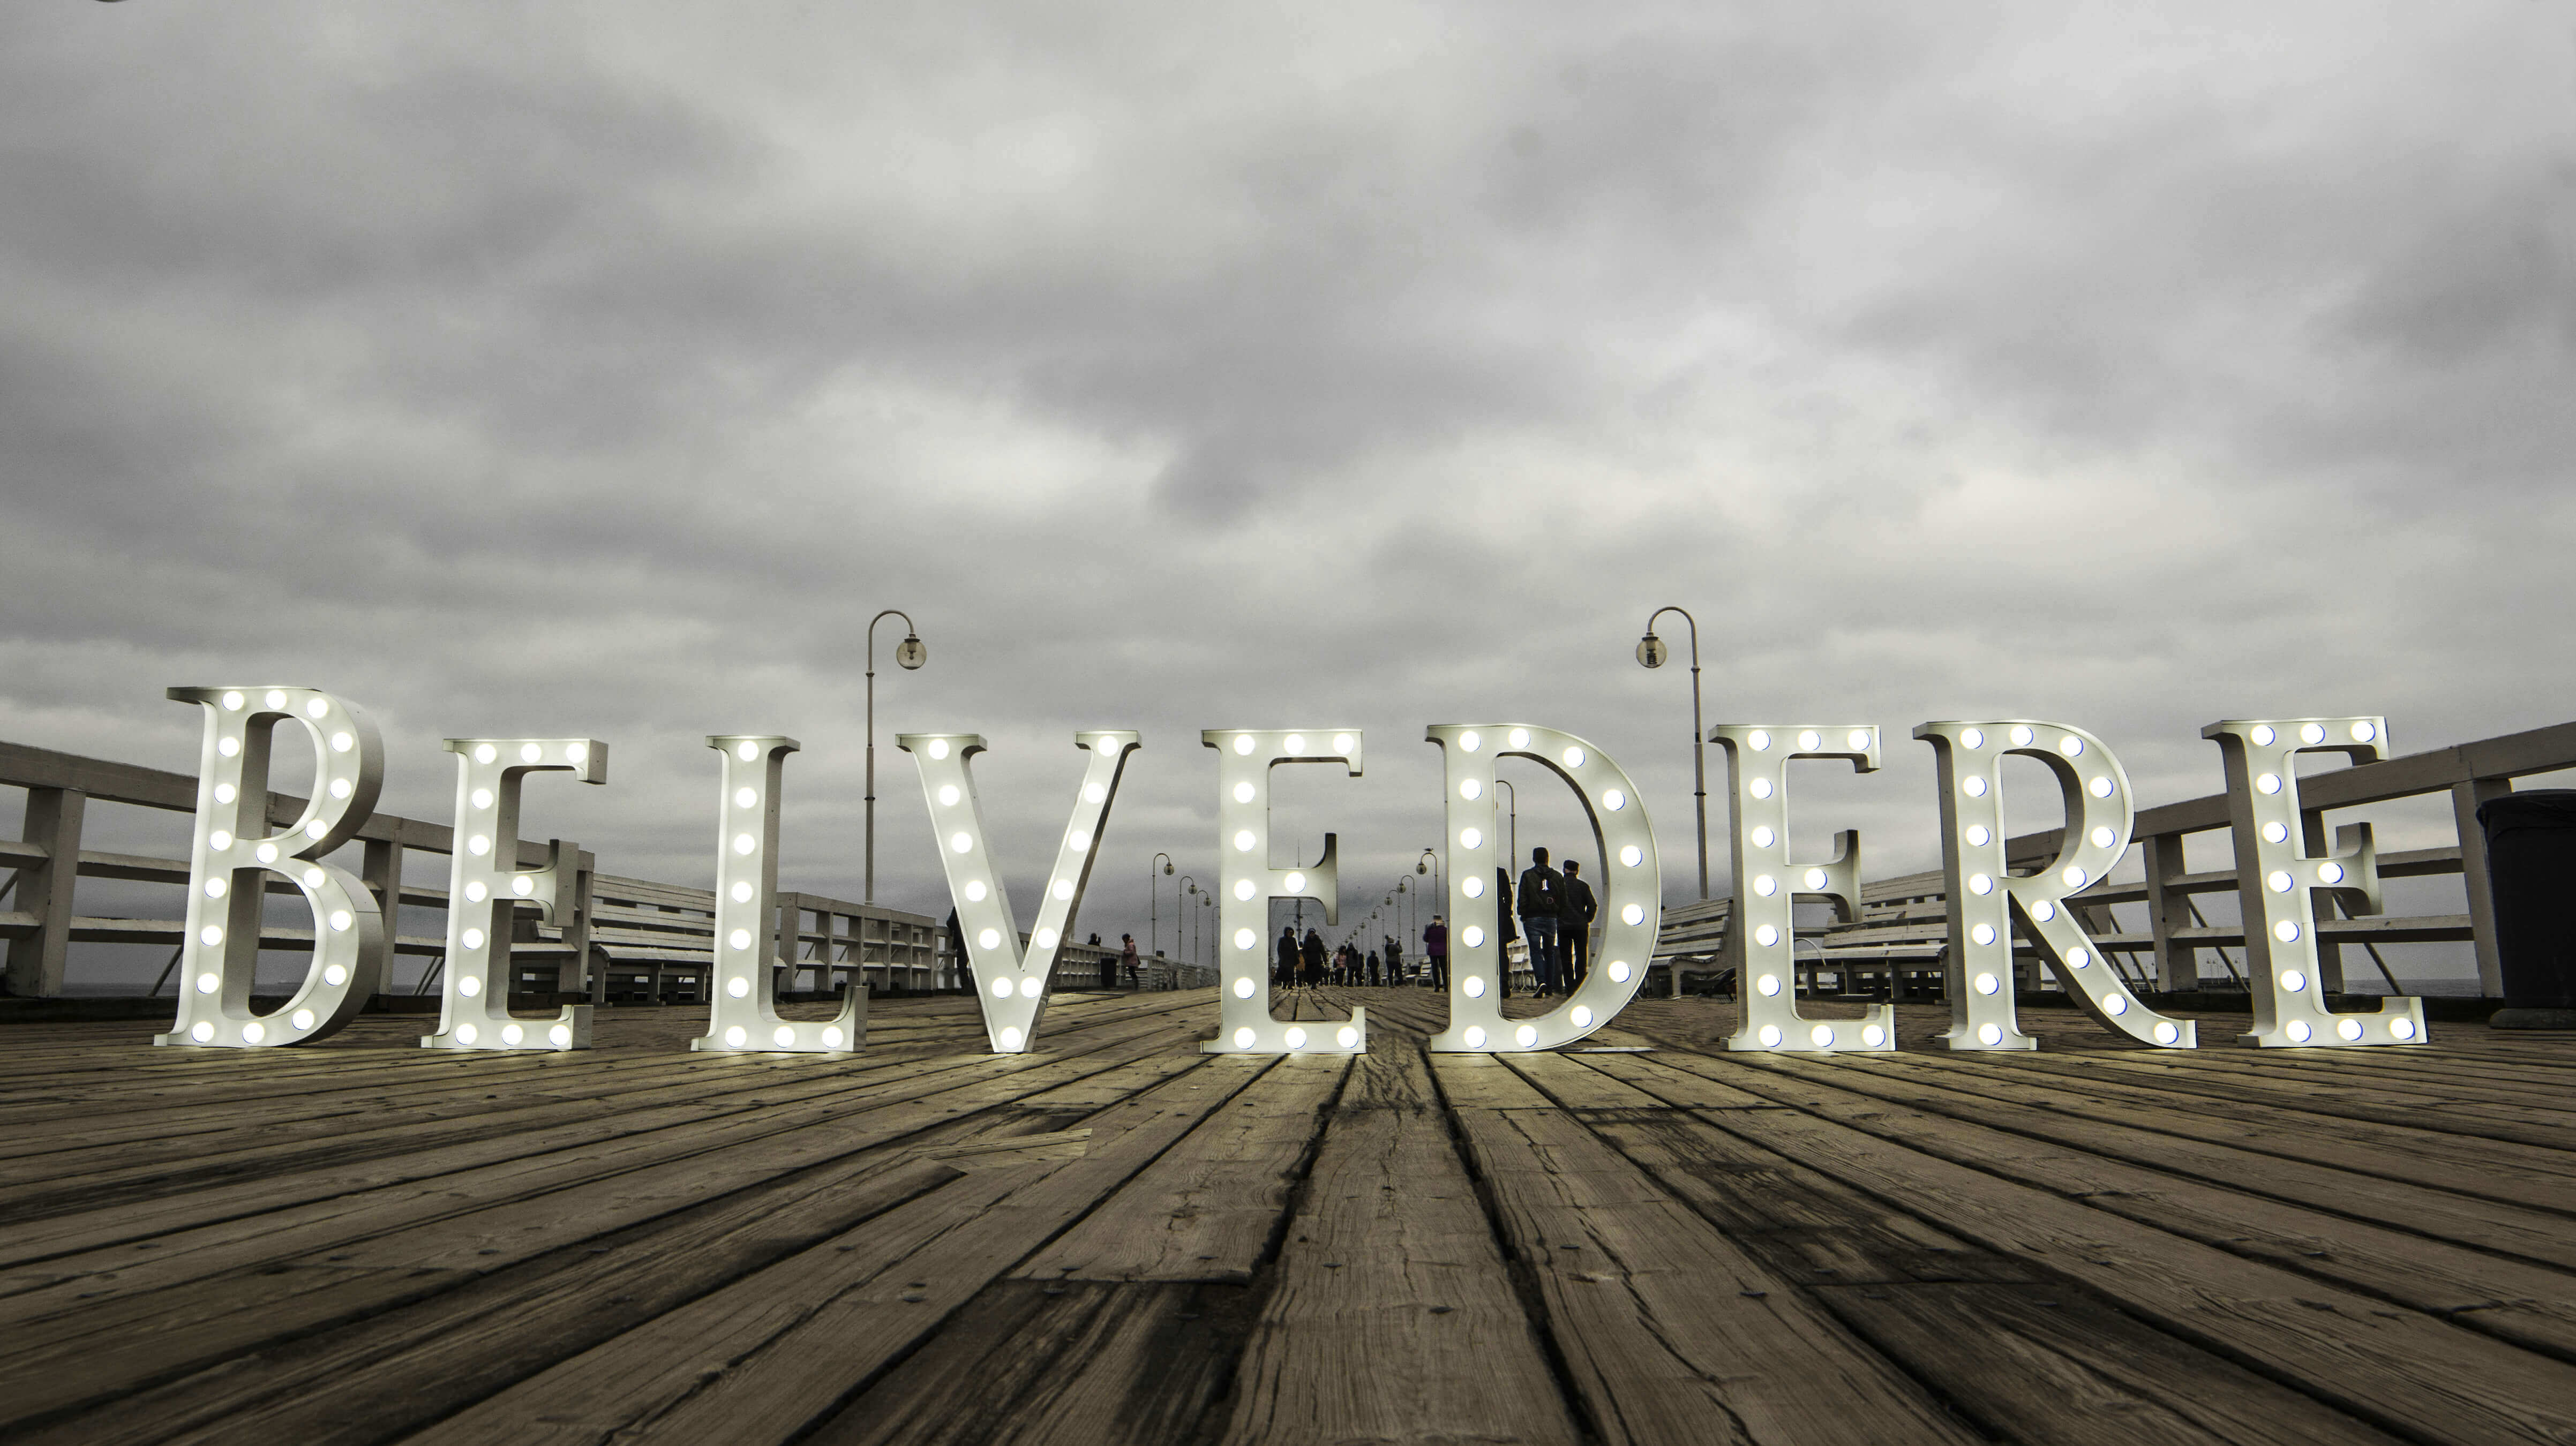 Belvedere - Belvedere - standing letters with bulbs on the pier